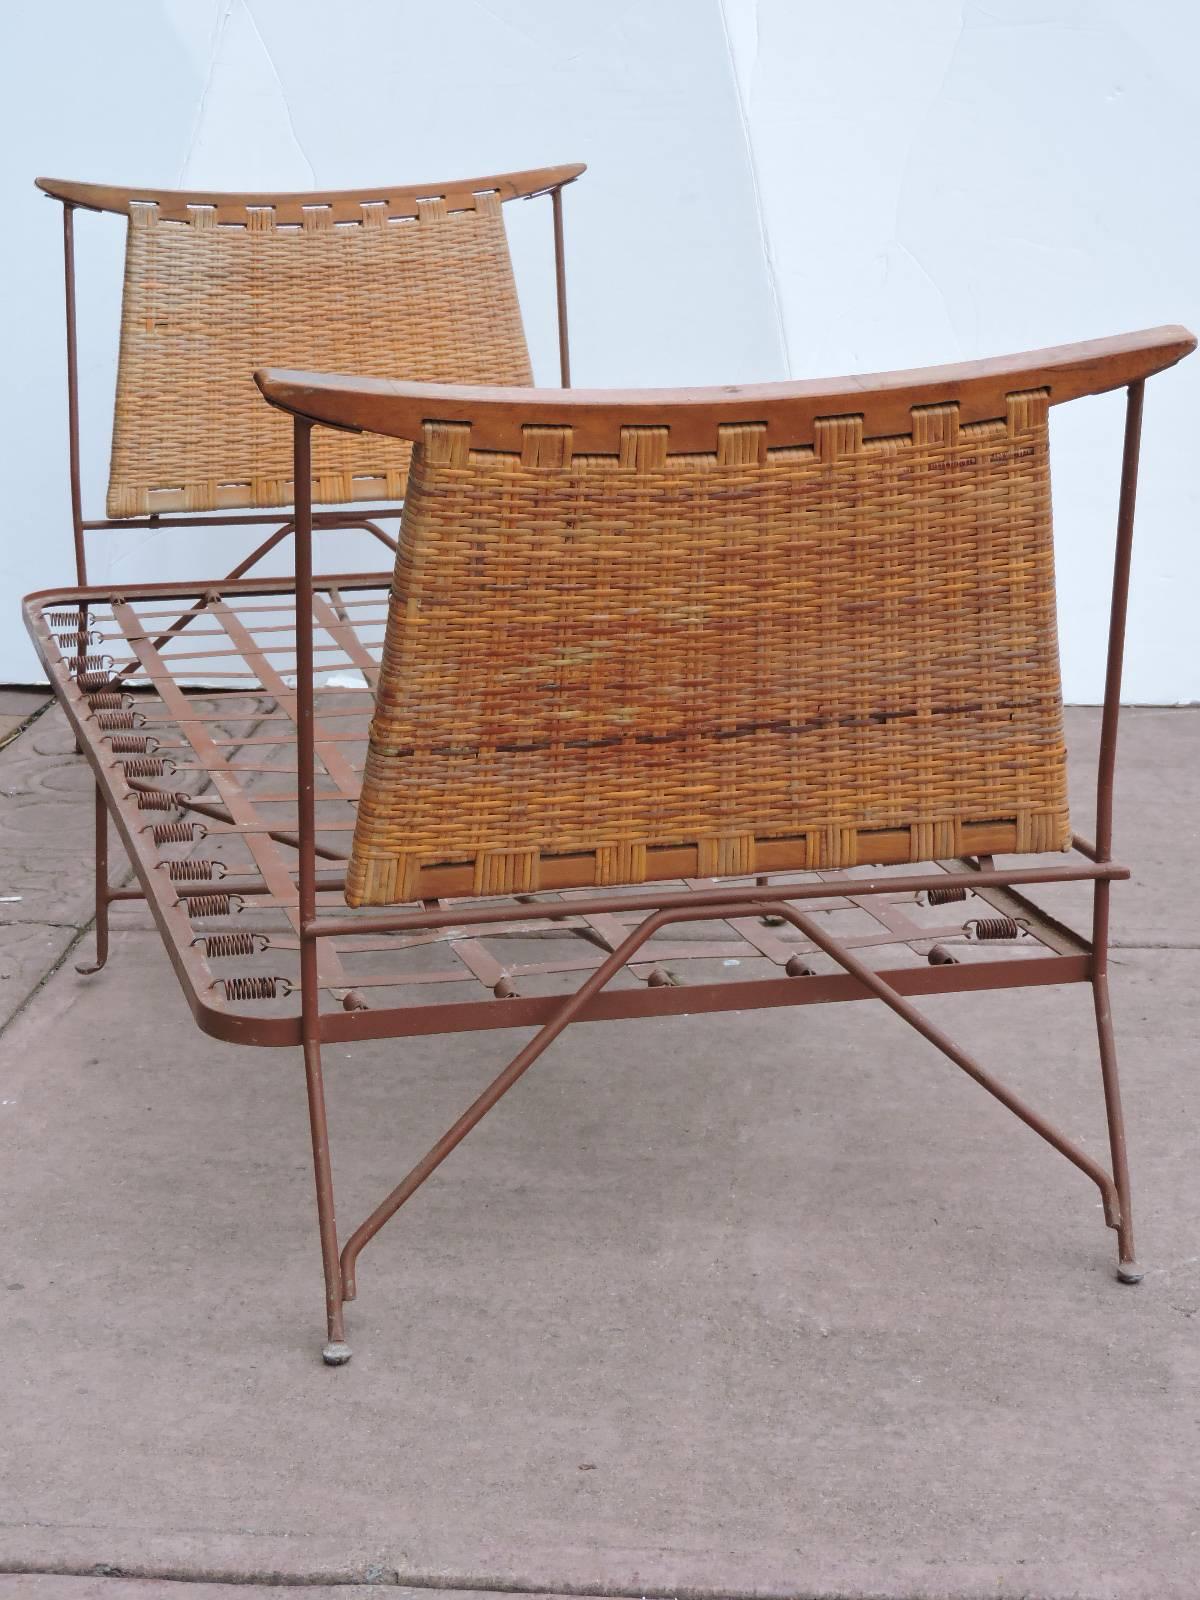 A mid 20th century wrought iron, wood and natural woven wicker cane daybed lounge with a striking sculptural form and all over beautifully aged original color patina. Possibly an obscure design by John Salterini - we have yet to see another one